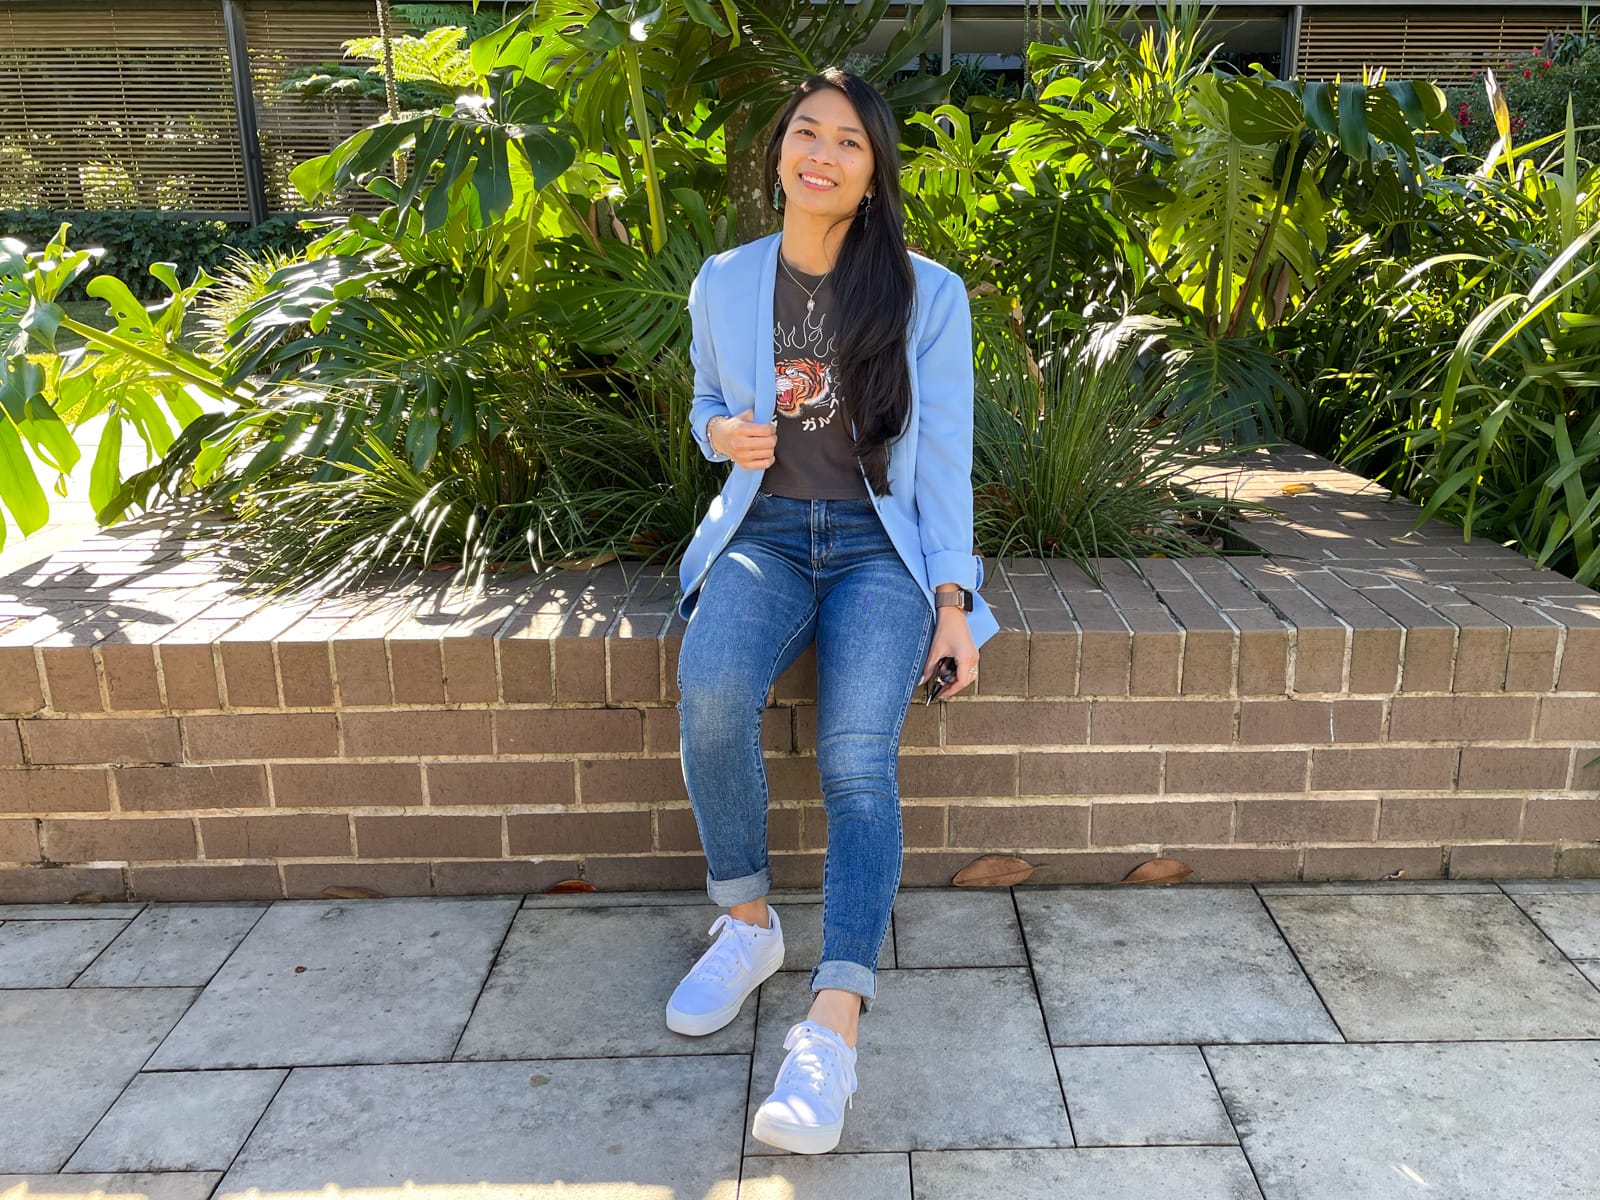 An Asian woman with dark hair, sitting on a brick wall. She is wearing a blue blazer over a dark grey graphic tee and blue jeans. She is wearing white sneakers.